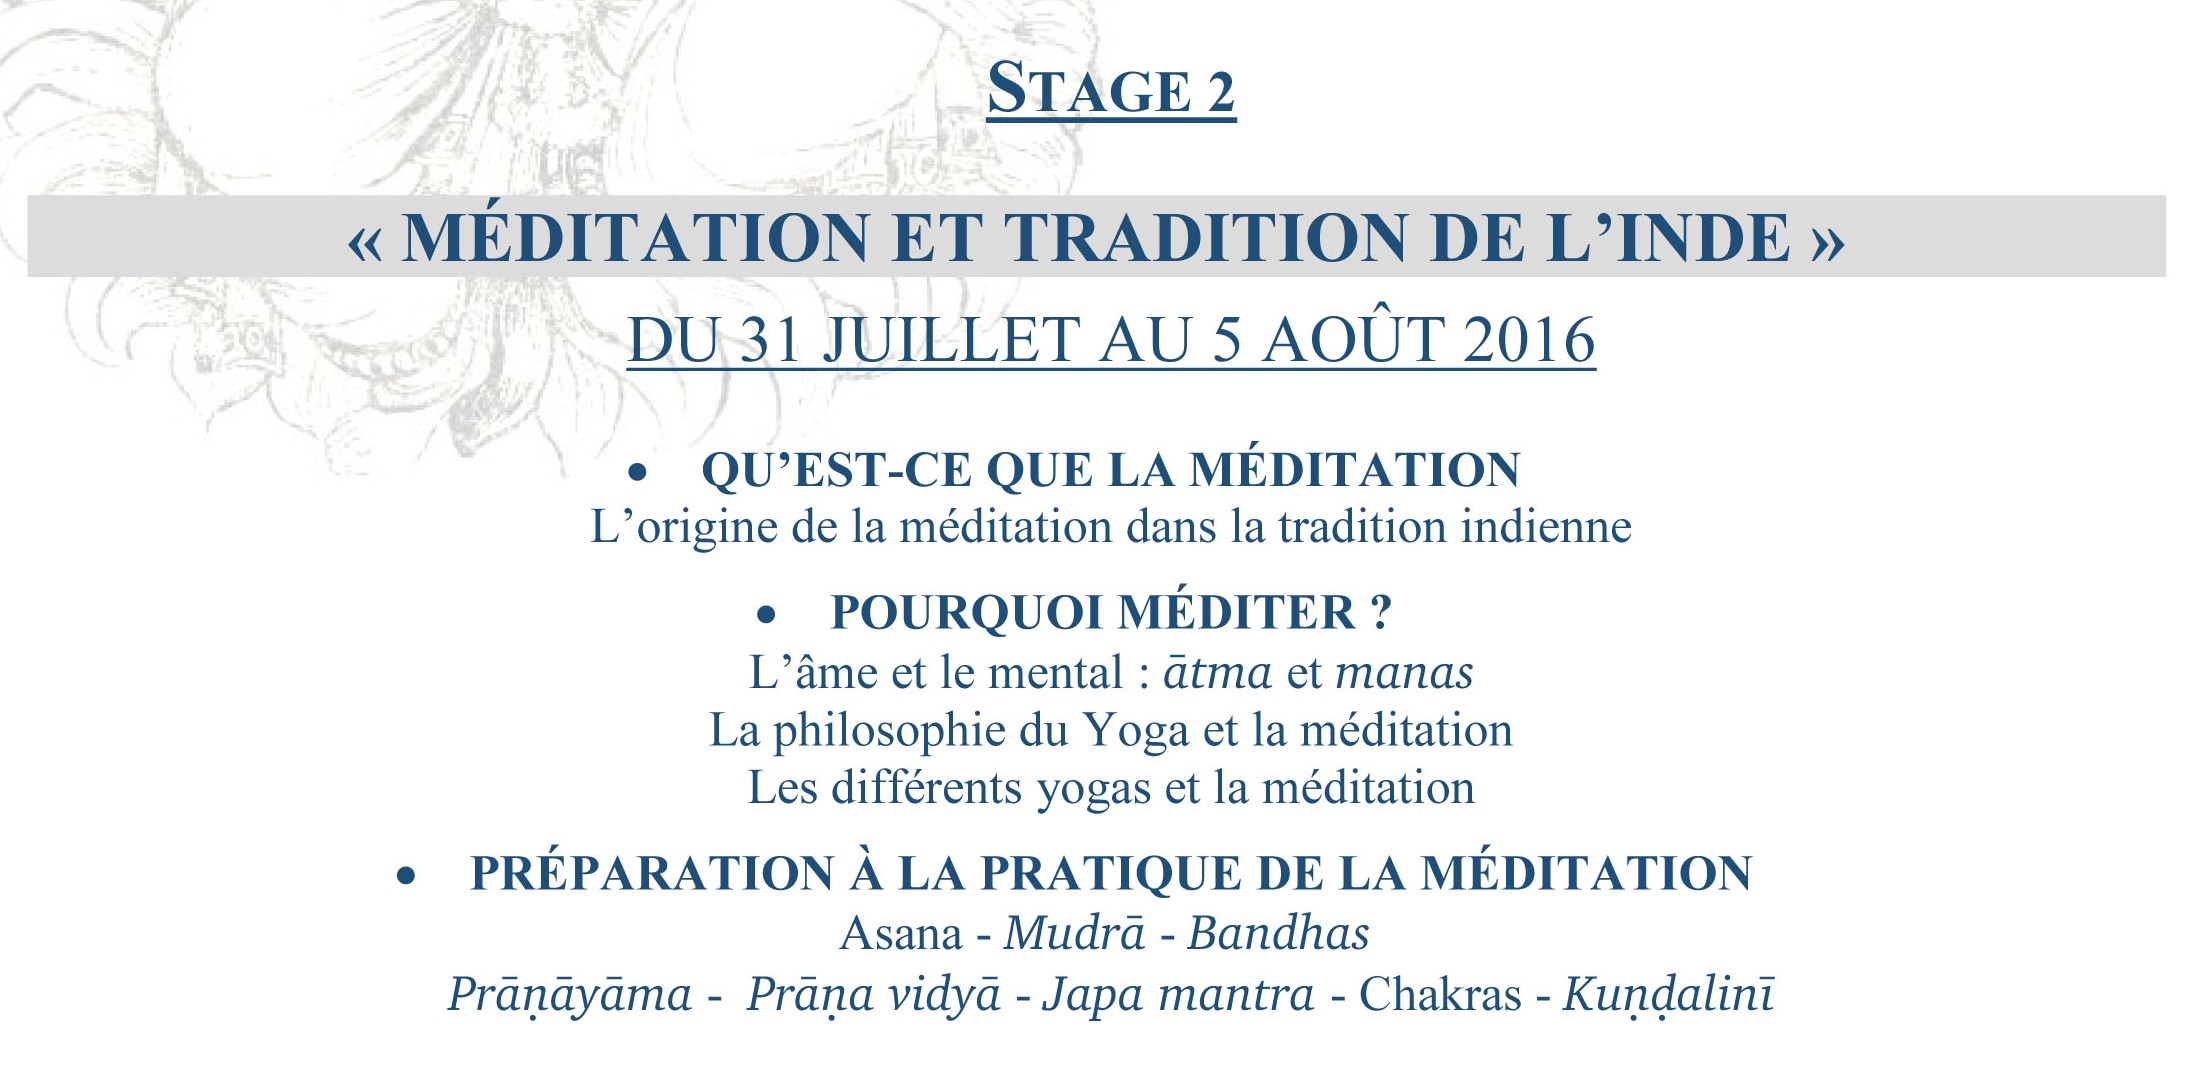 STAGE ETE 2016 STAGE 2 rect